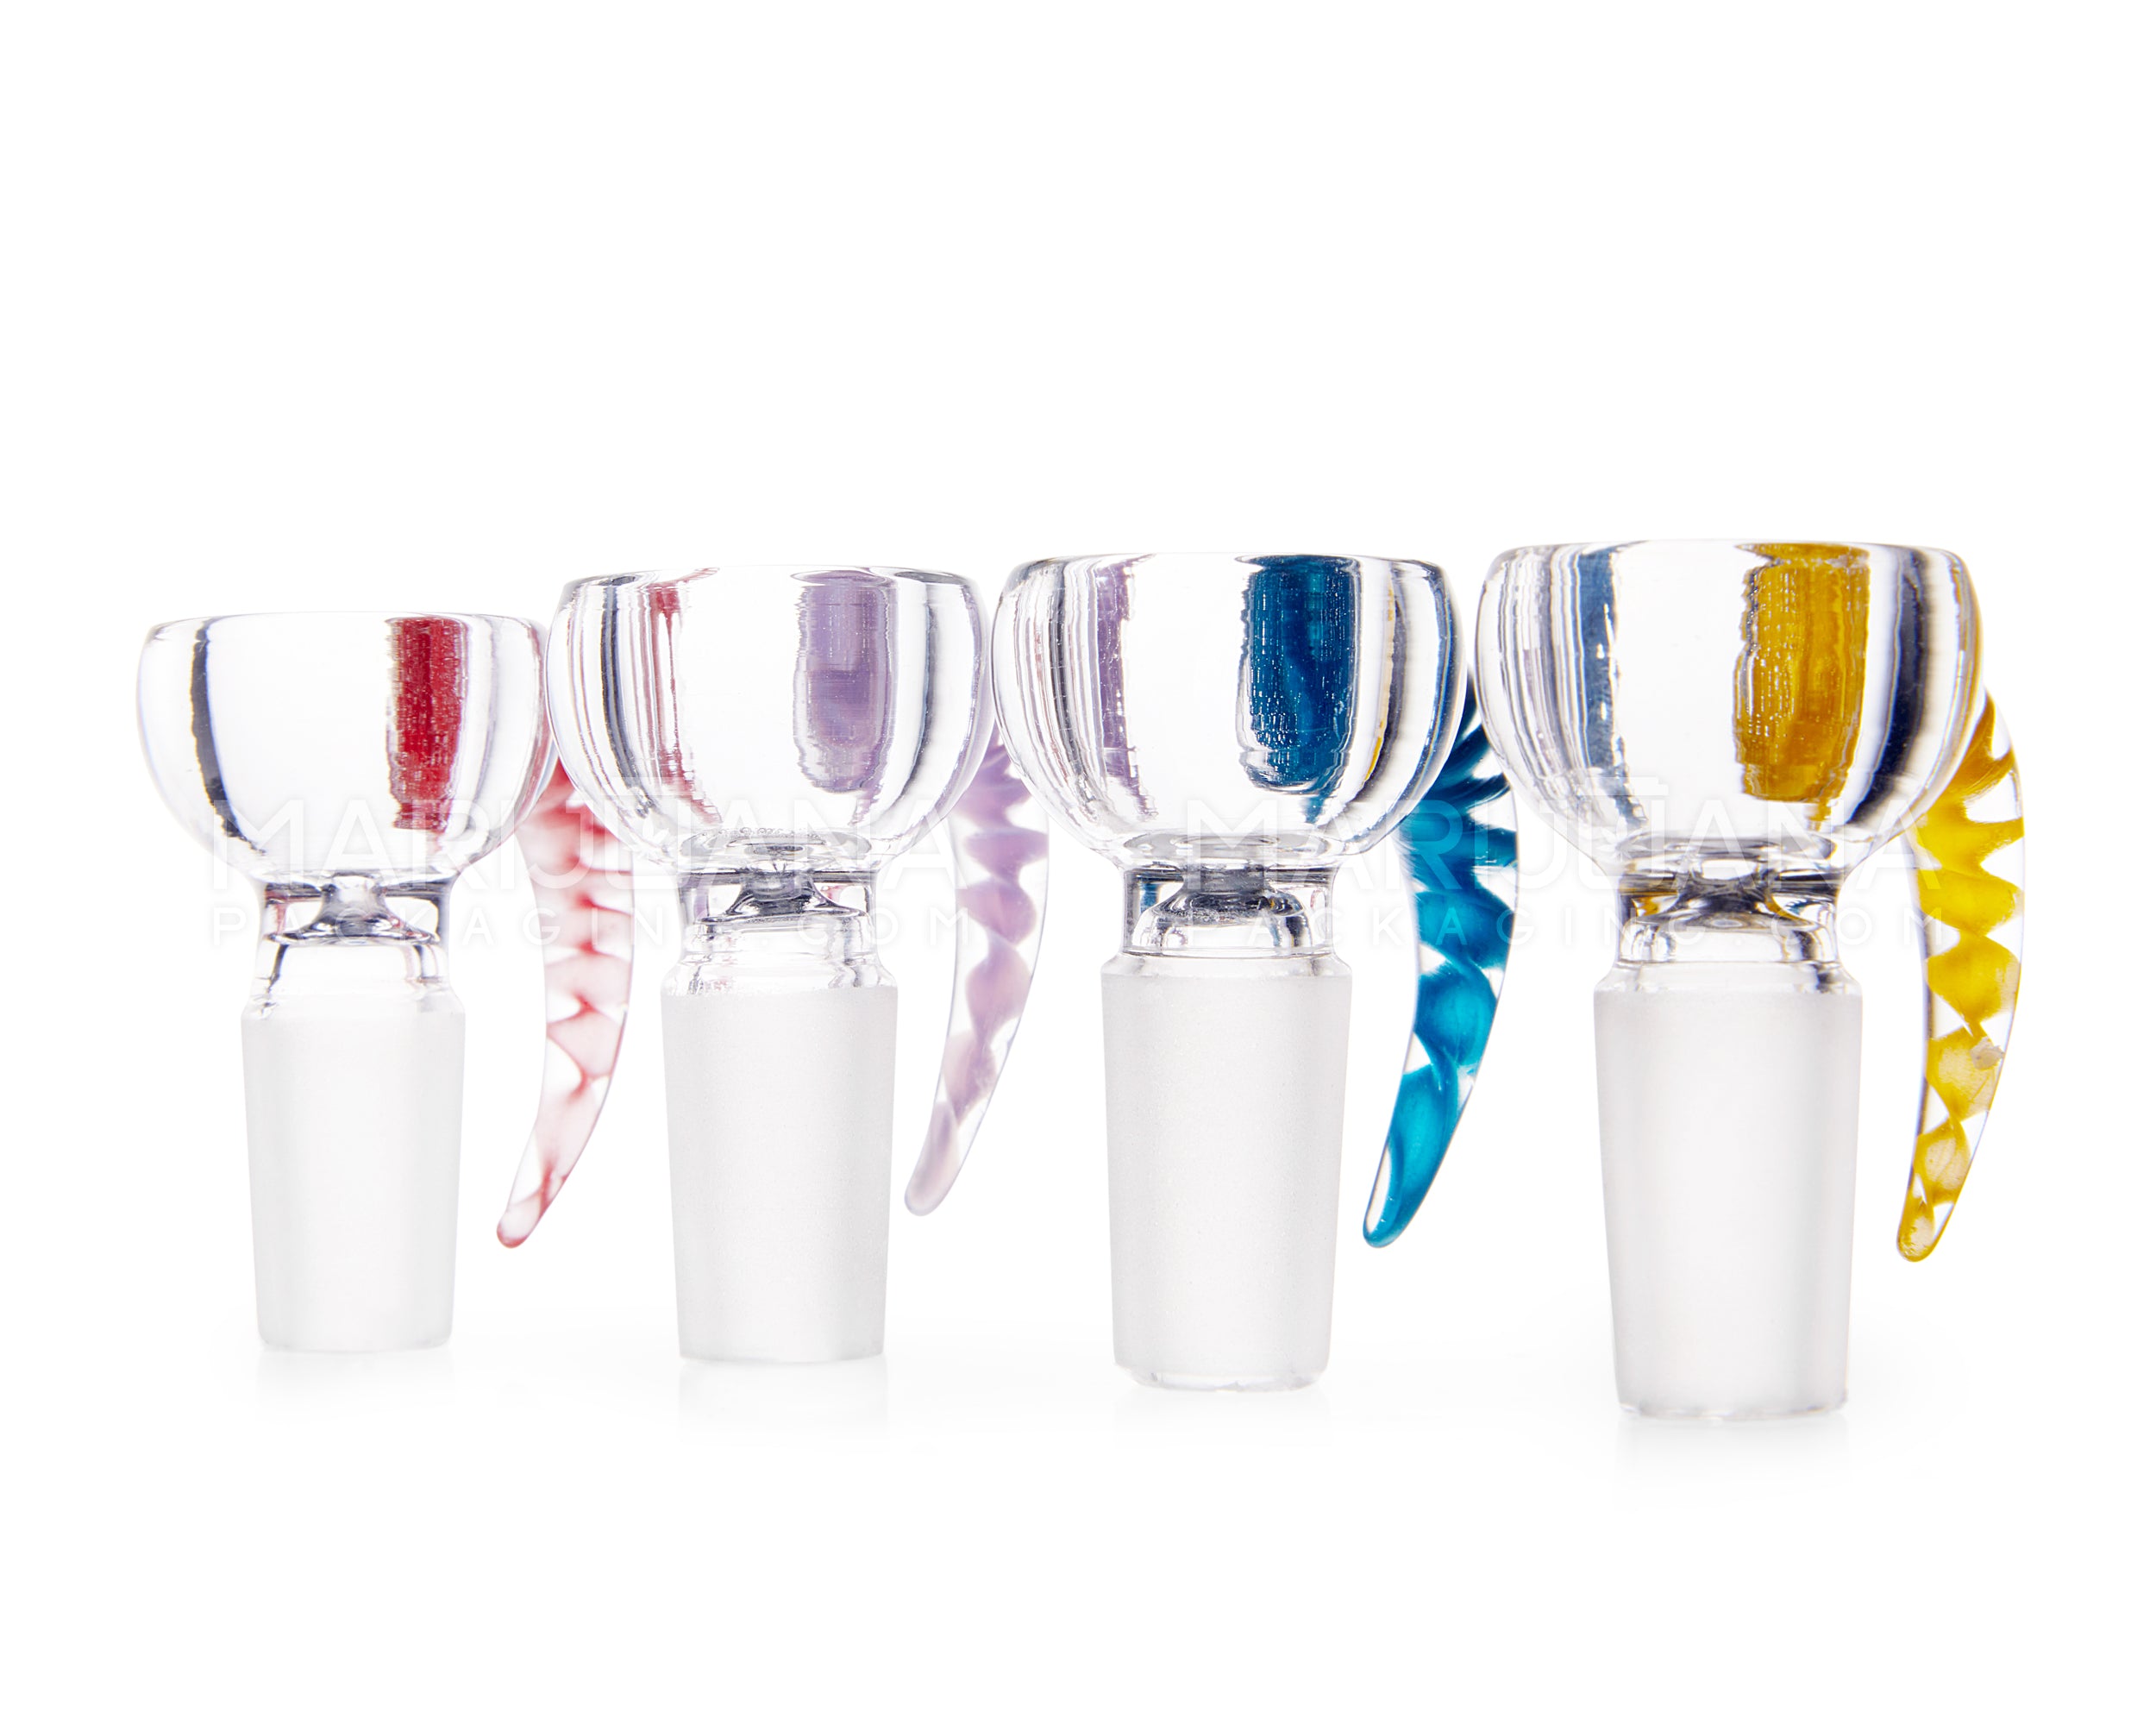 Twist Clear Bowl w/ Spiral Horn Handle | Glass - 14mm - Assorted